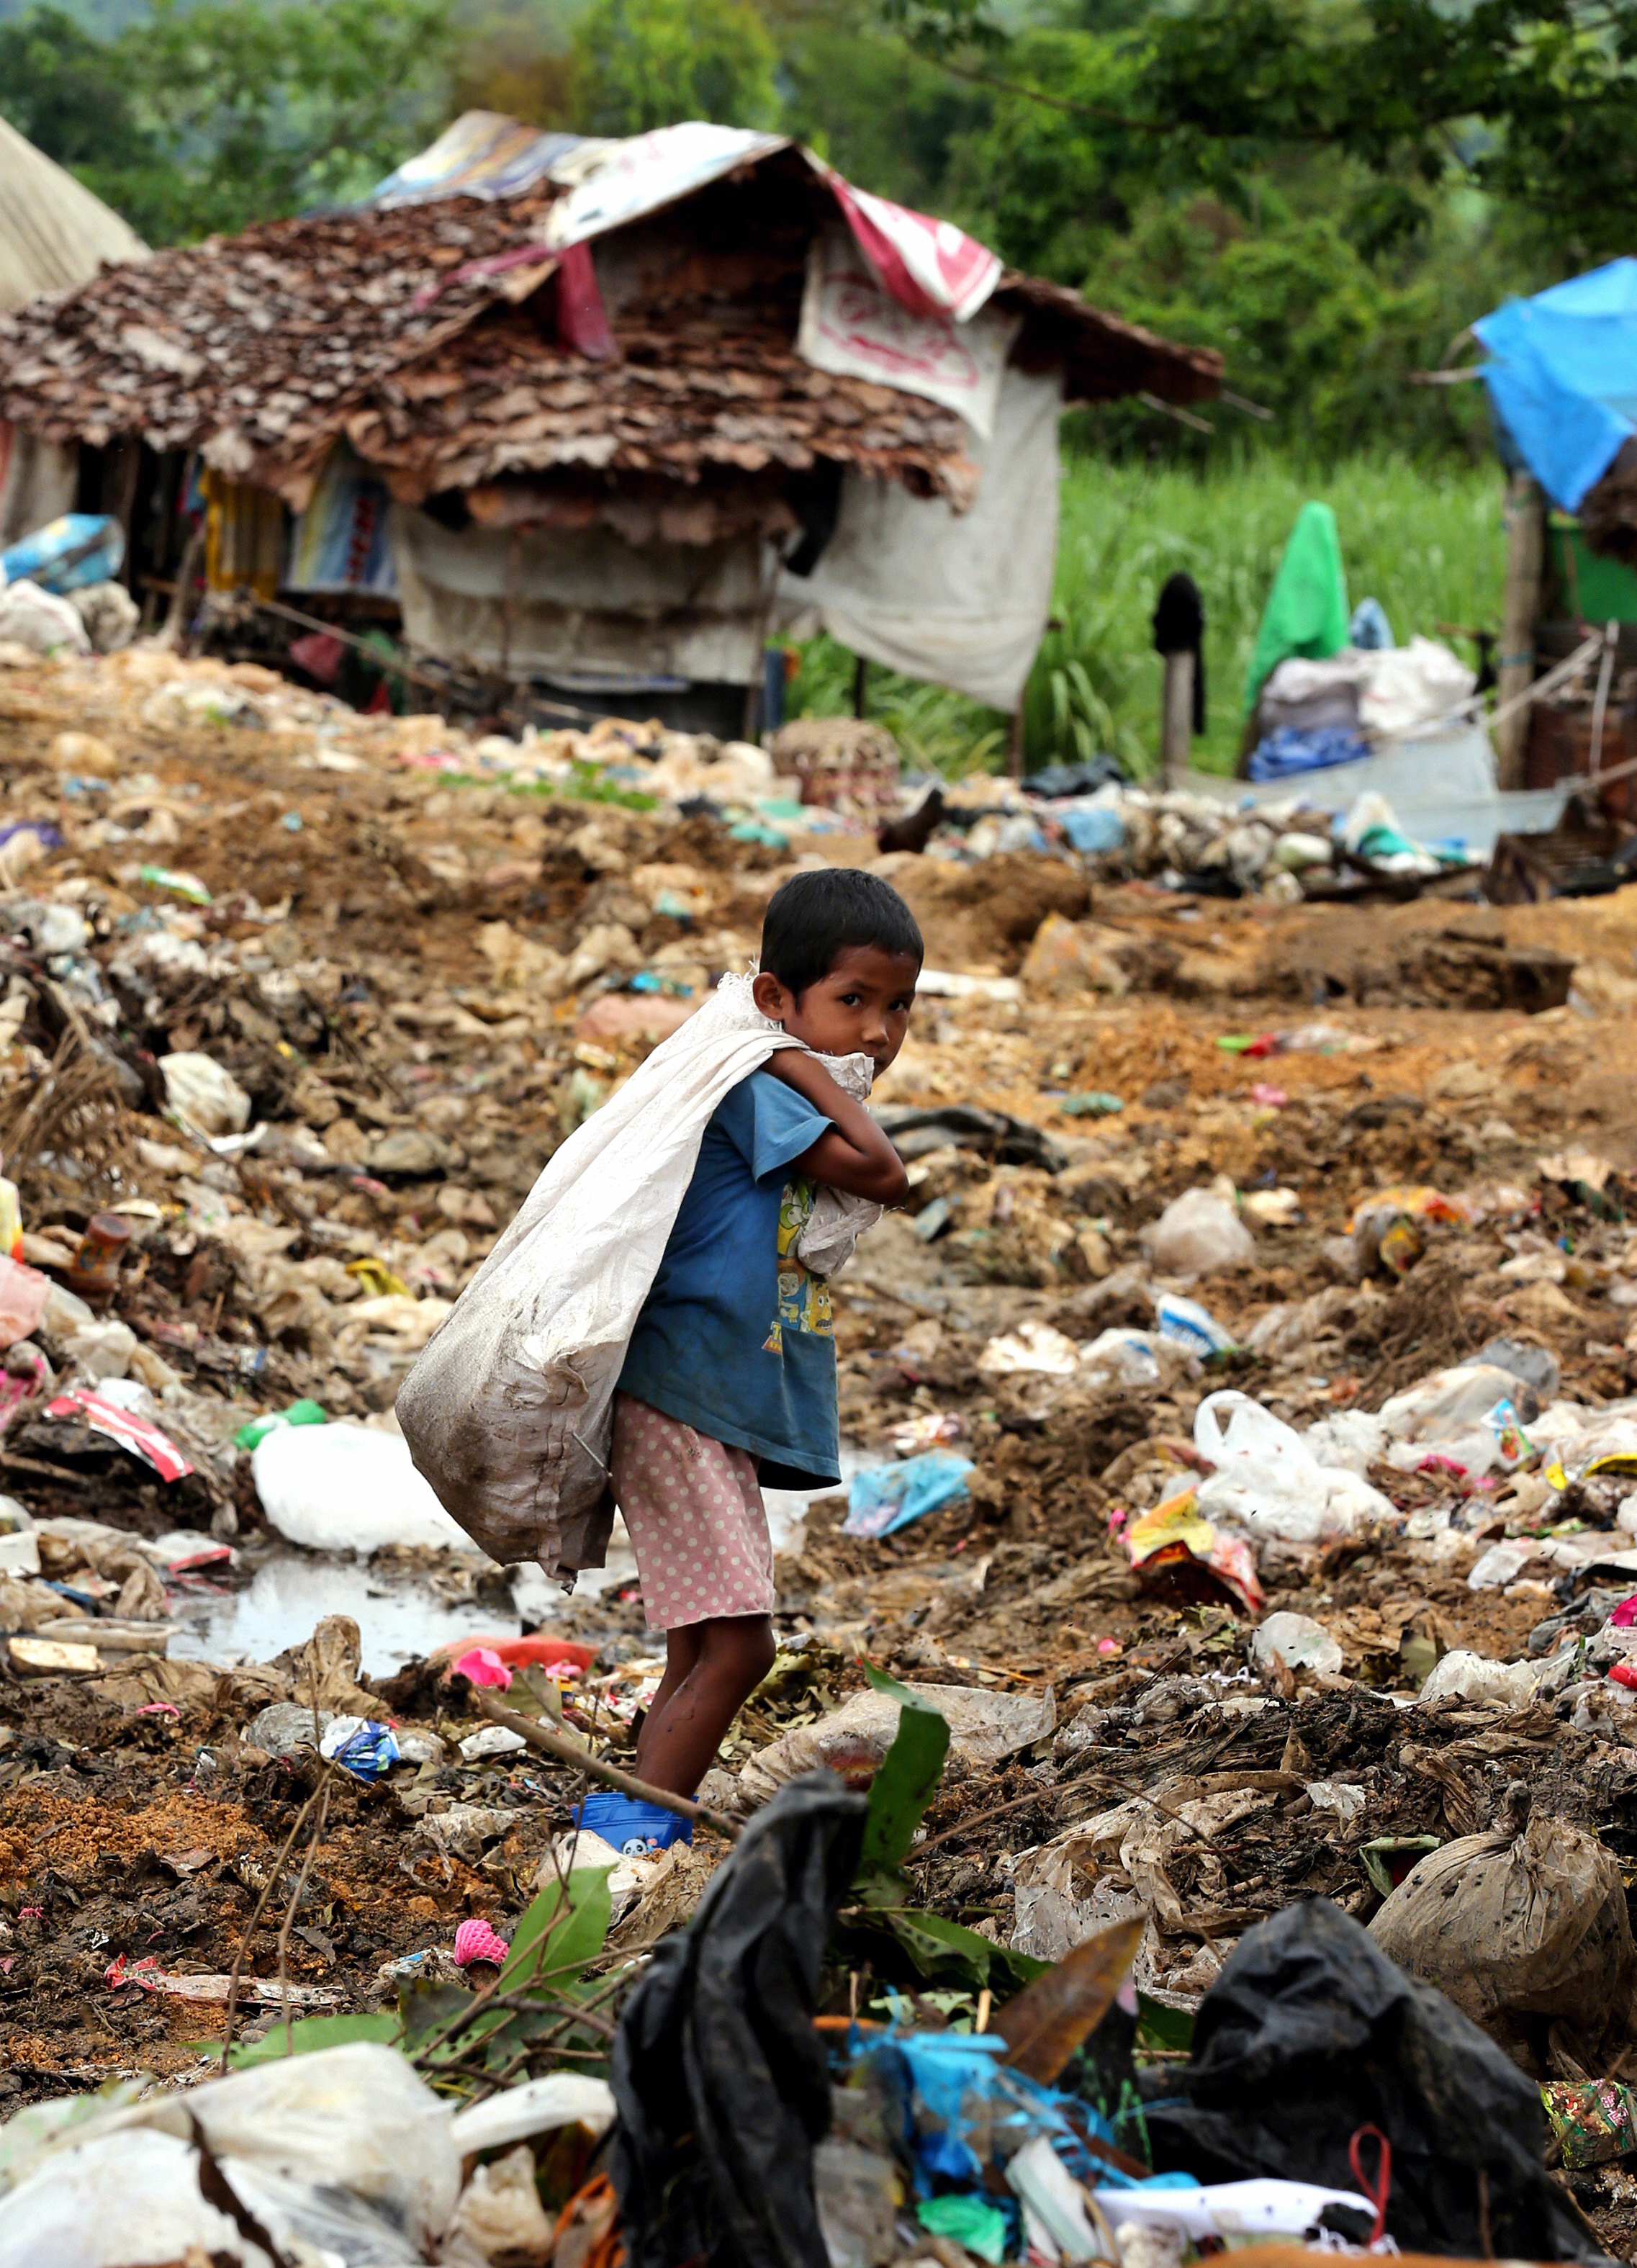 An illegal-immigrant boy from Burma works at mountains of rubbish in Mae Sot, Thailand, on July 18, 2013 (The Asahi Shimbun—Getty Images)